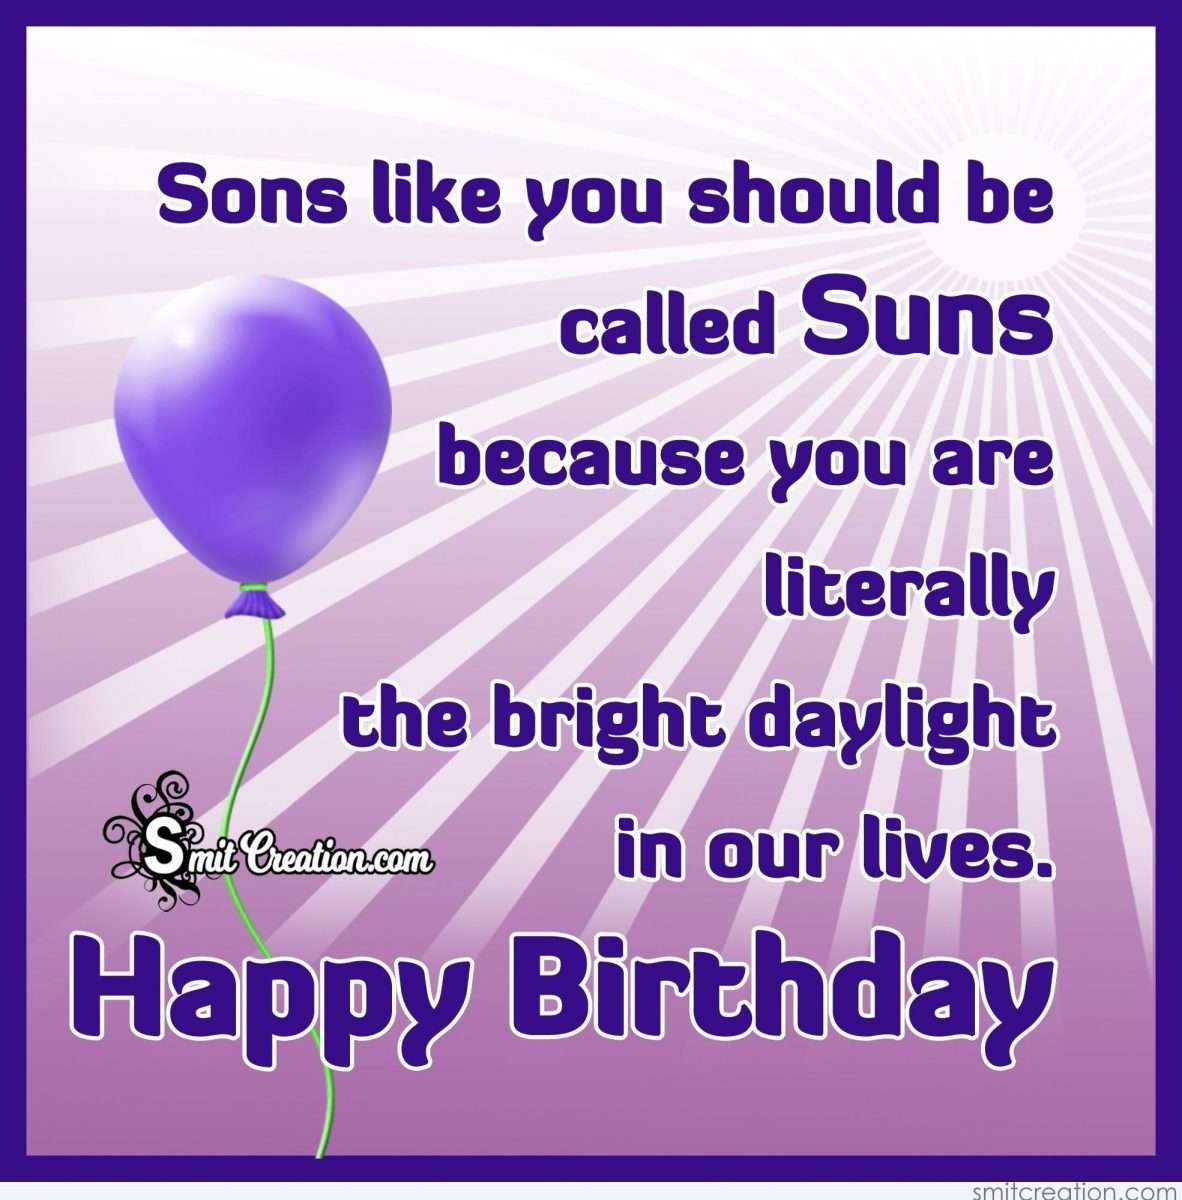 Birthday Wishes for Son Images, Pictures and Graphics